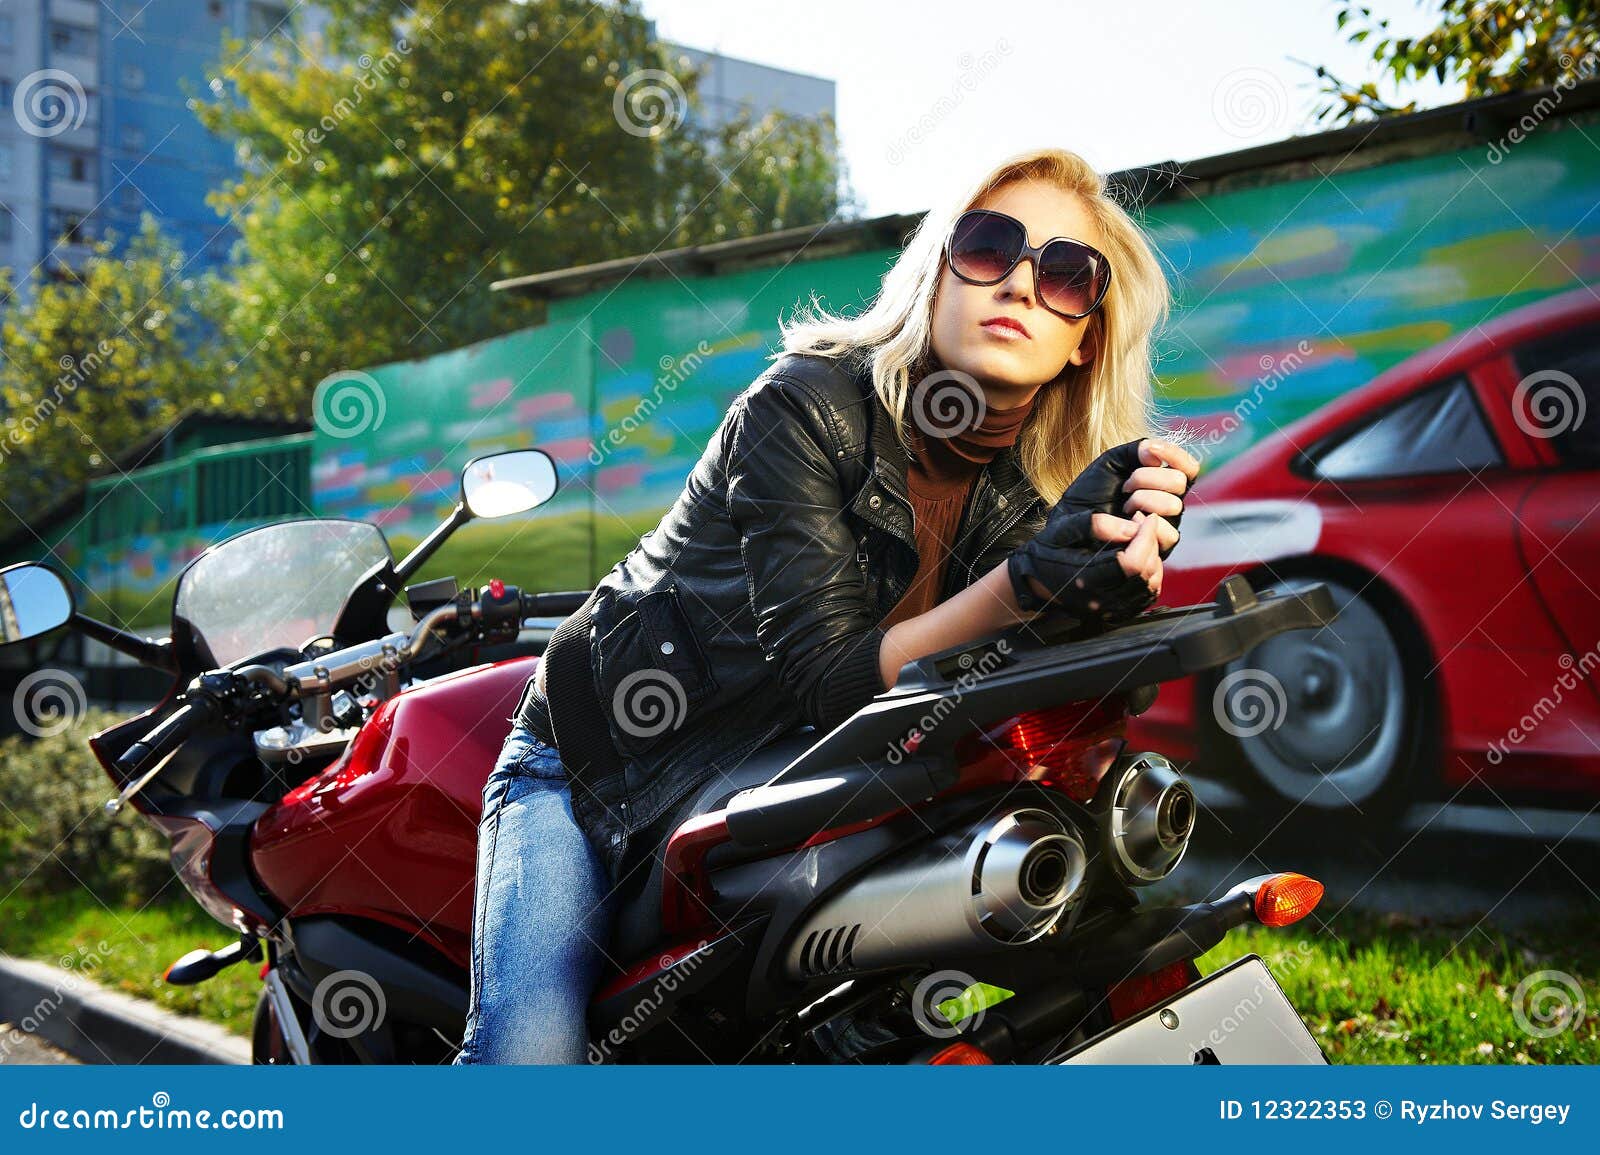 Blonde Sits about a Red Motorcycle Stock Image - Image of motorcycle ...